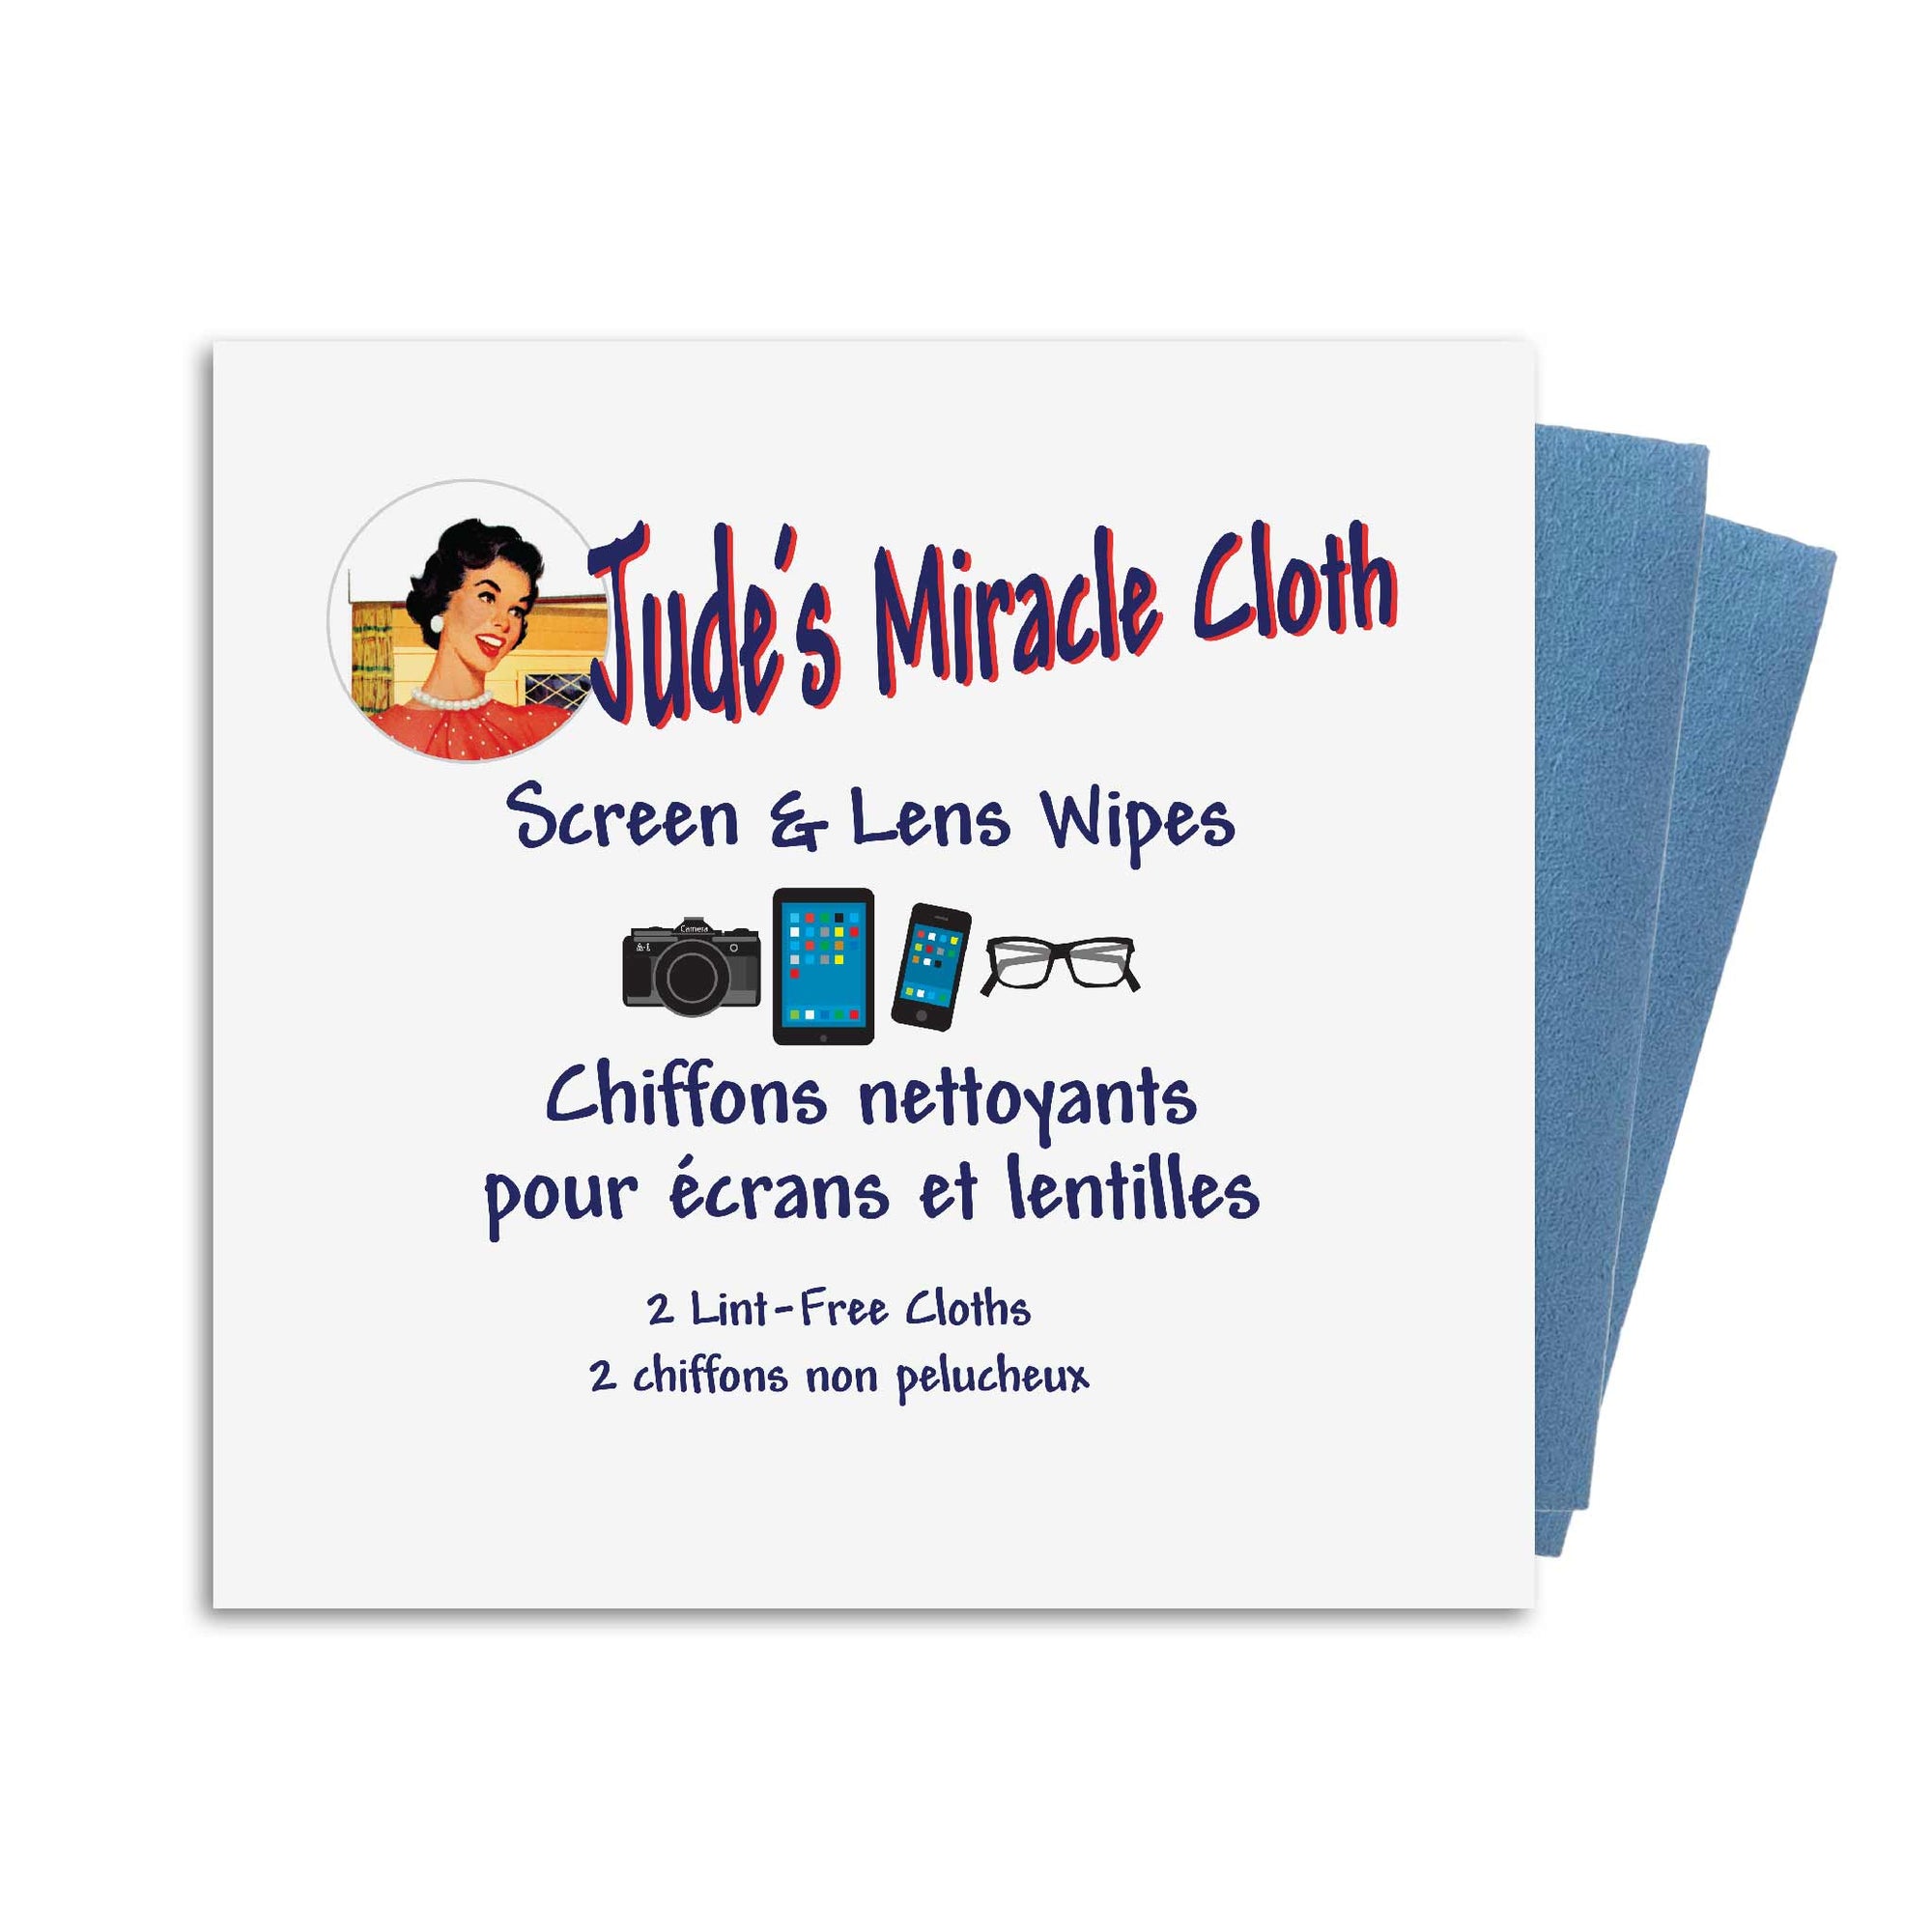 Jude's Screen & Lens Wipes - Jude's Miracle Cloth